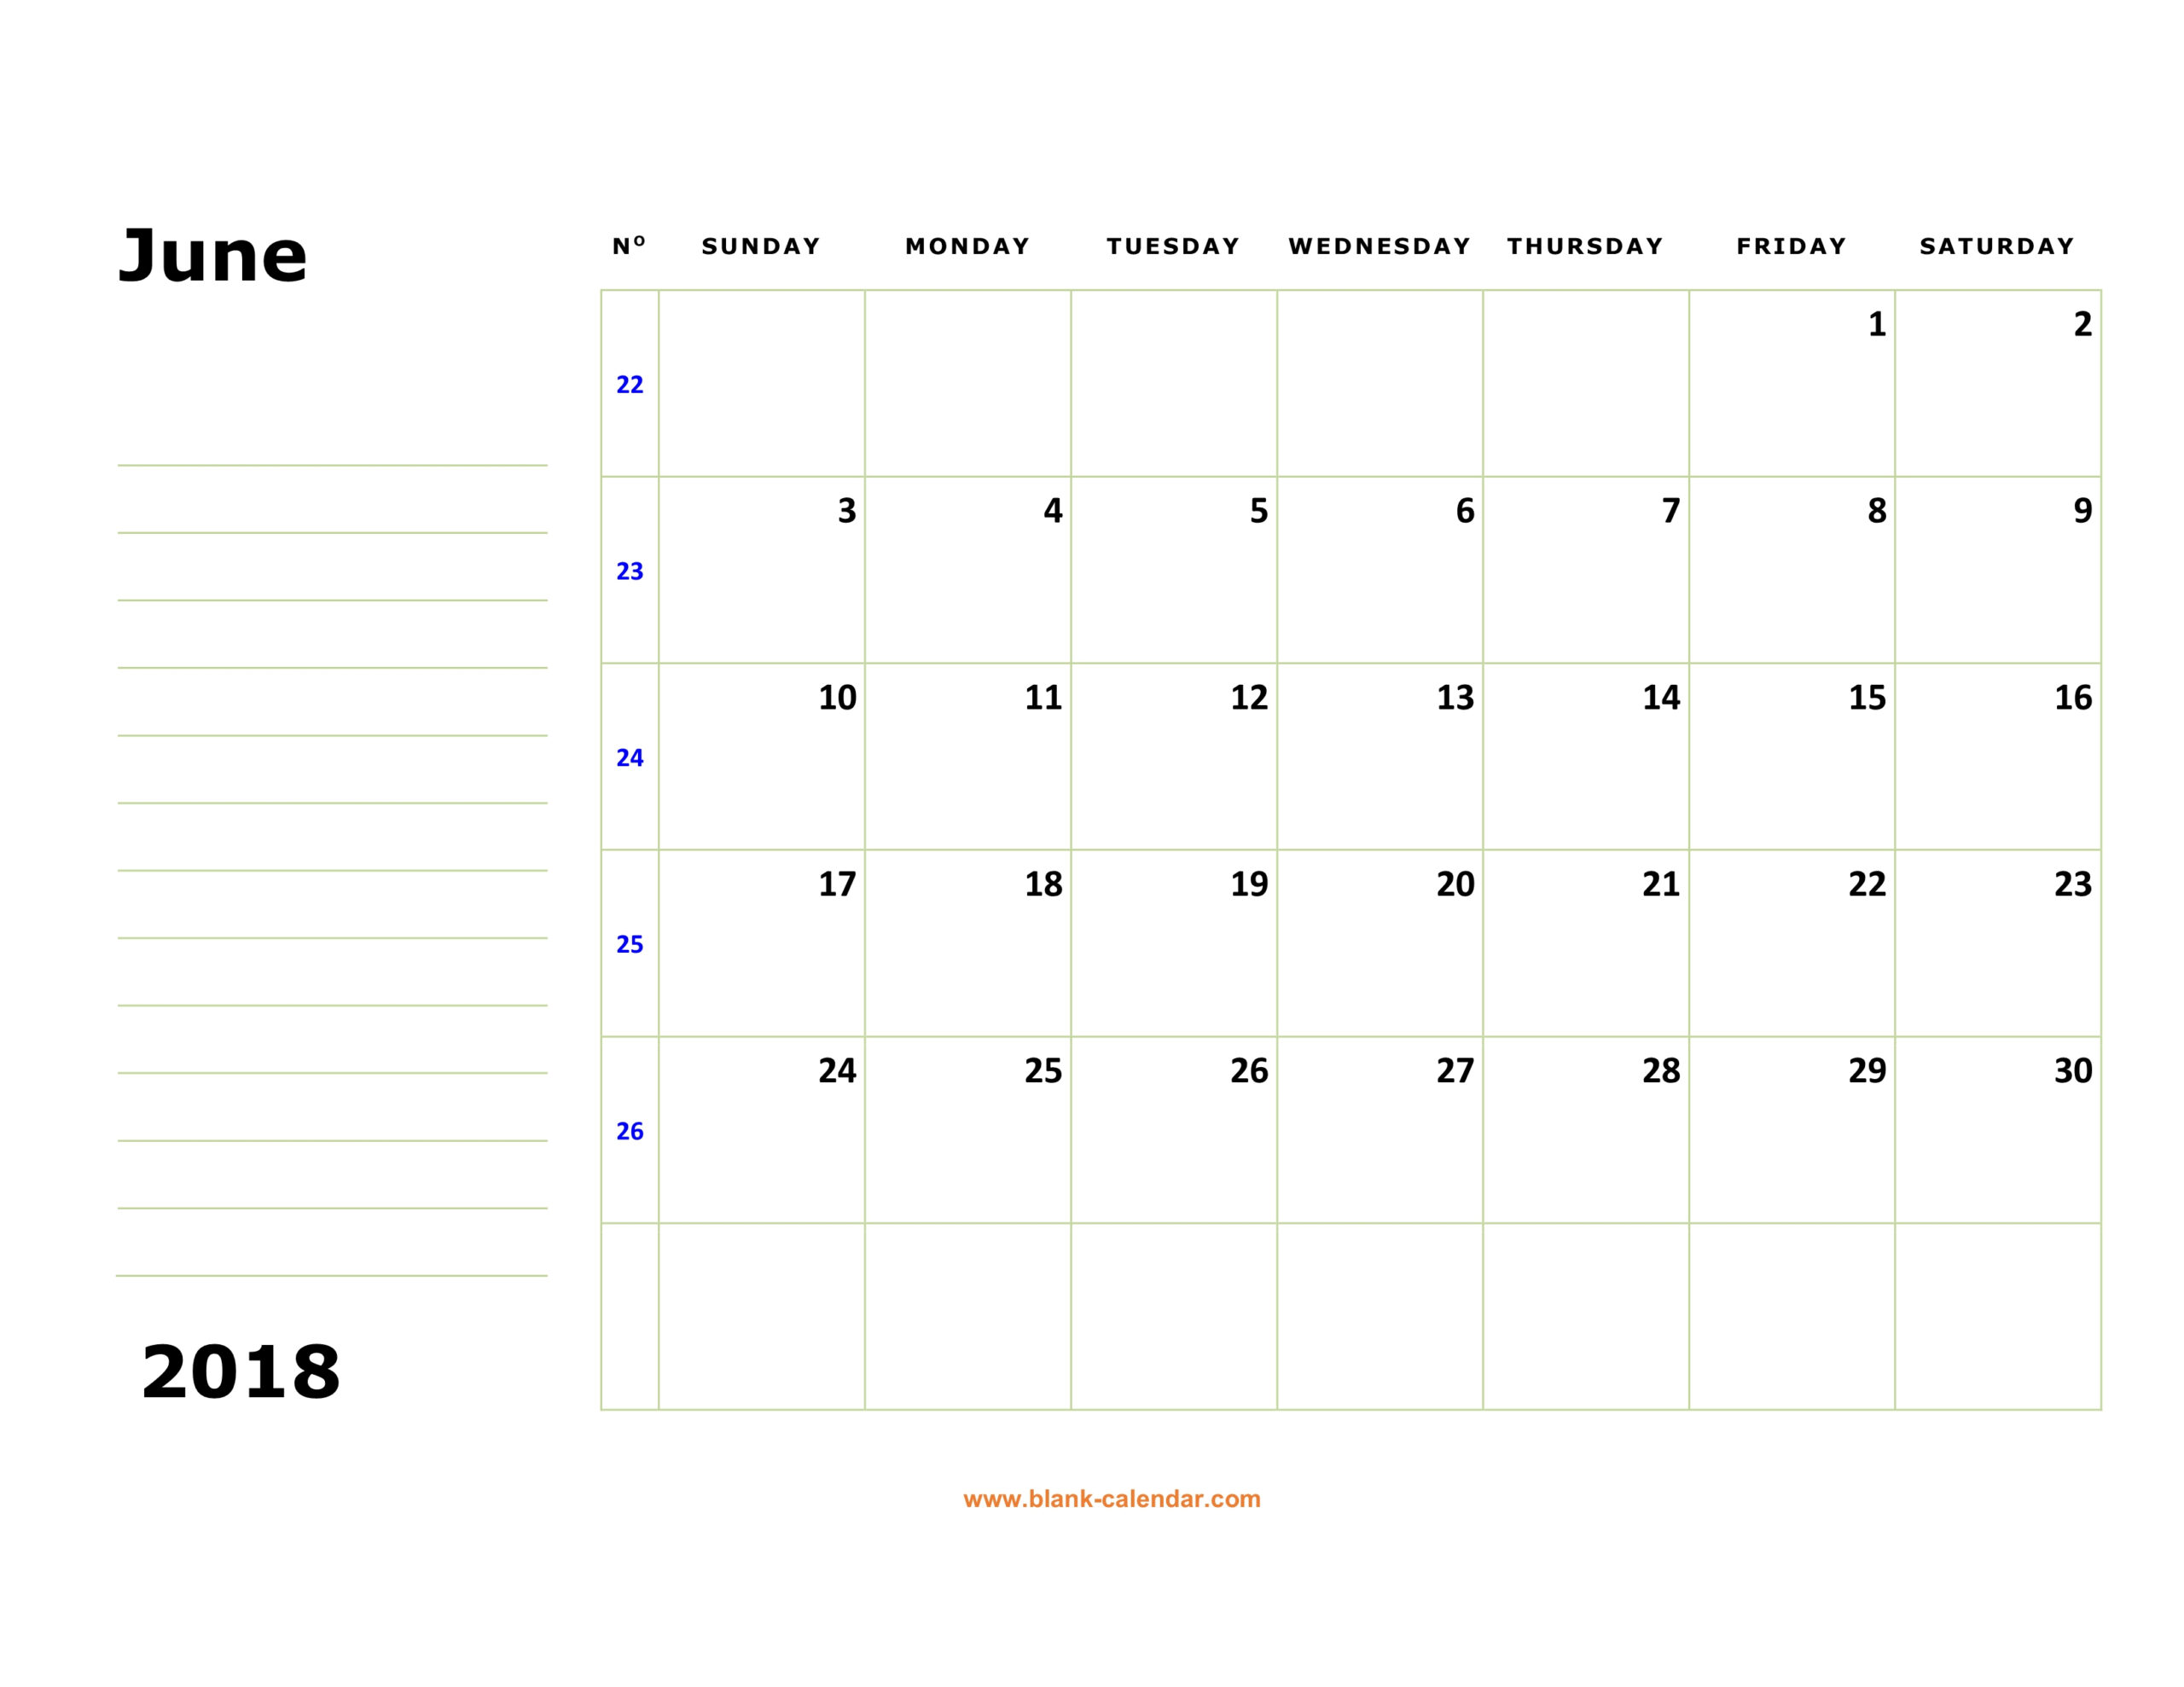 Printable Calendar Large Squares | Example Calendar Printable throughout Downloaded Calendar With Large Squares